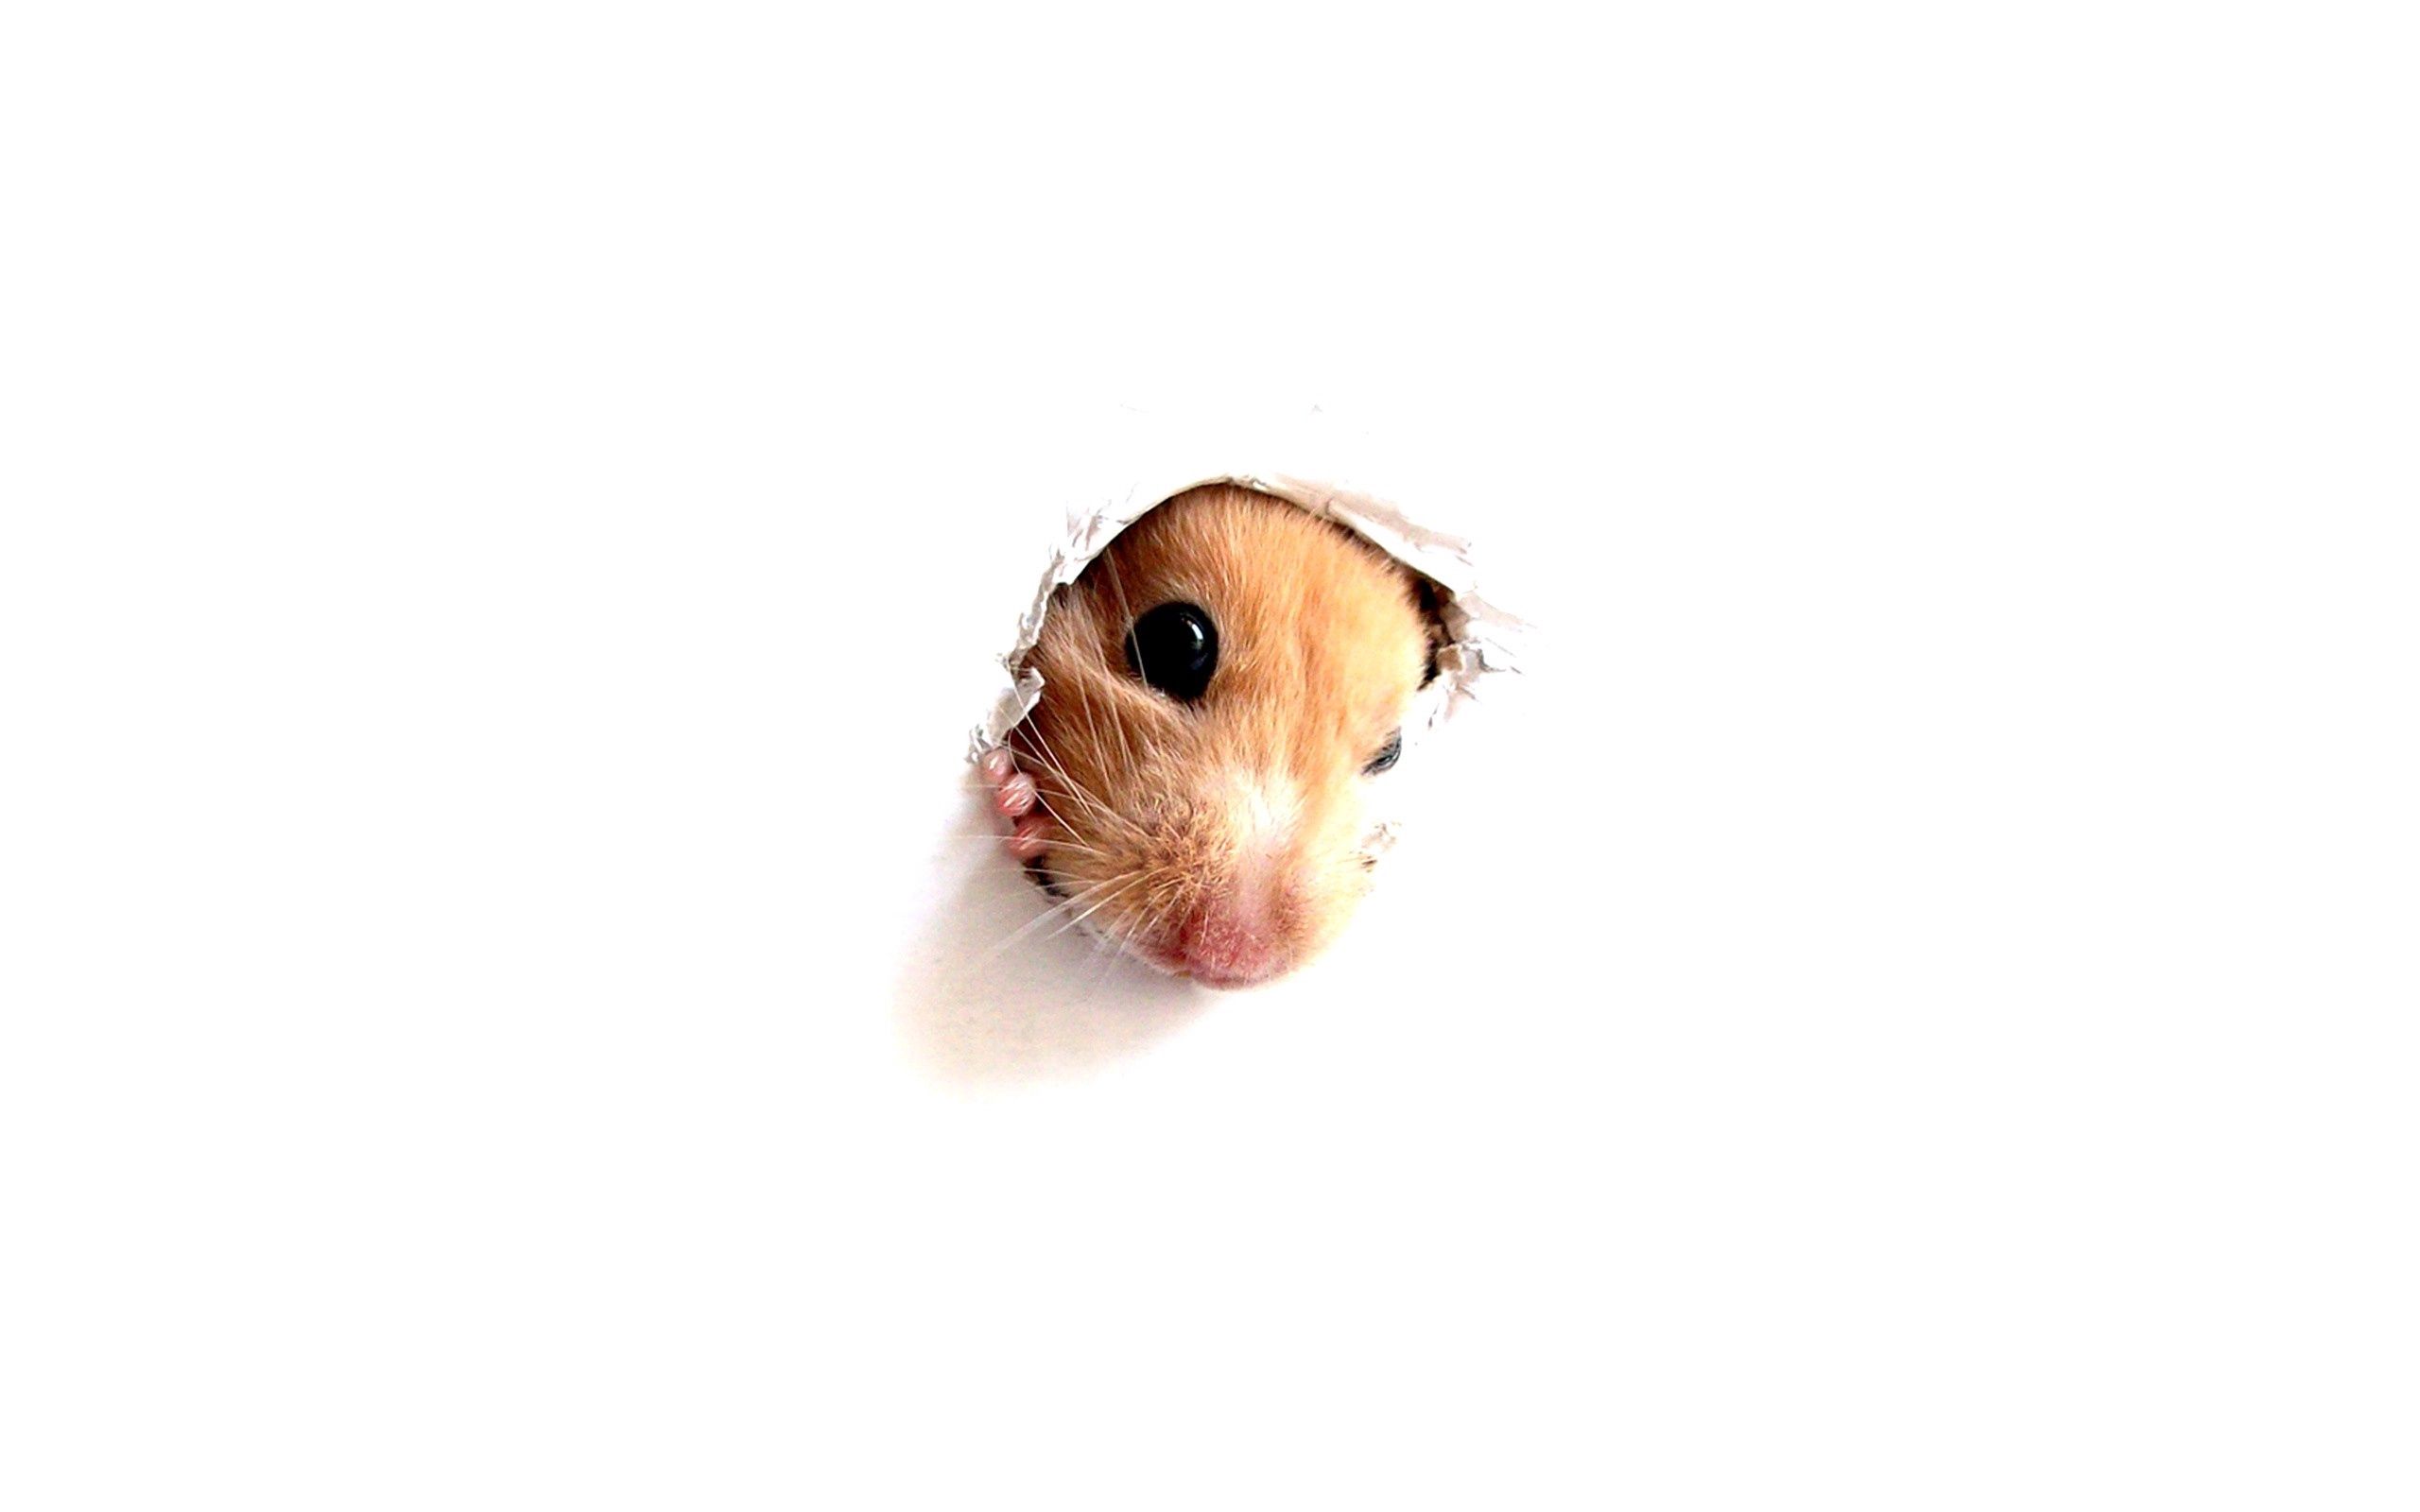 animals, muzzle, paper, rodent, hole, hamster